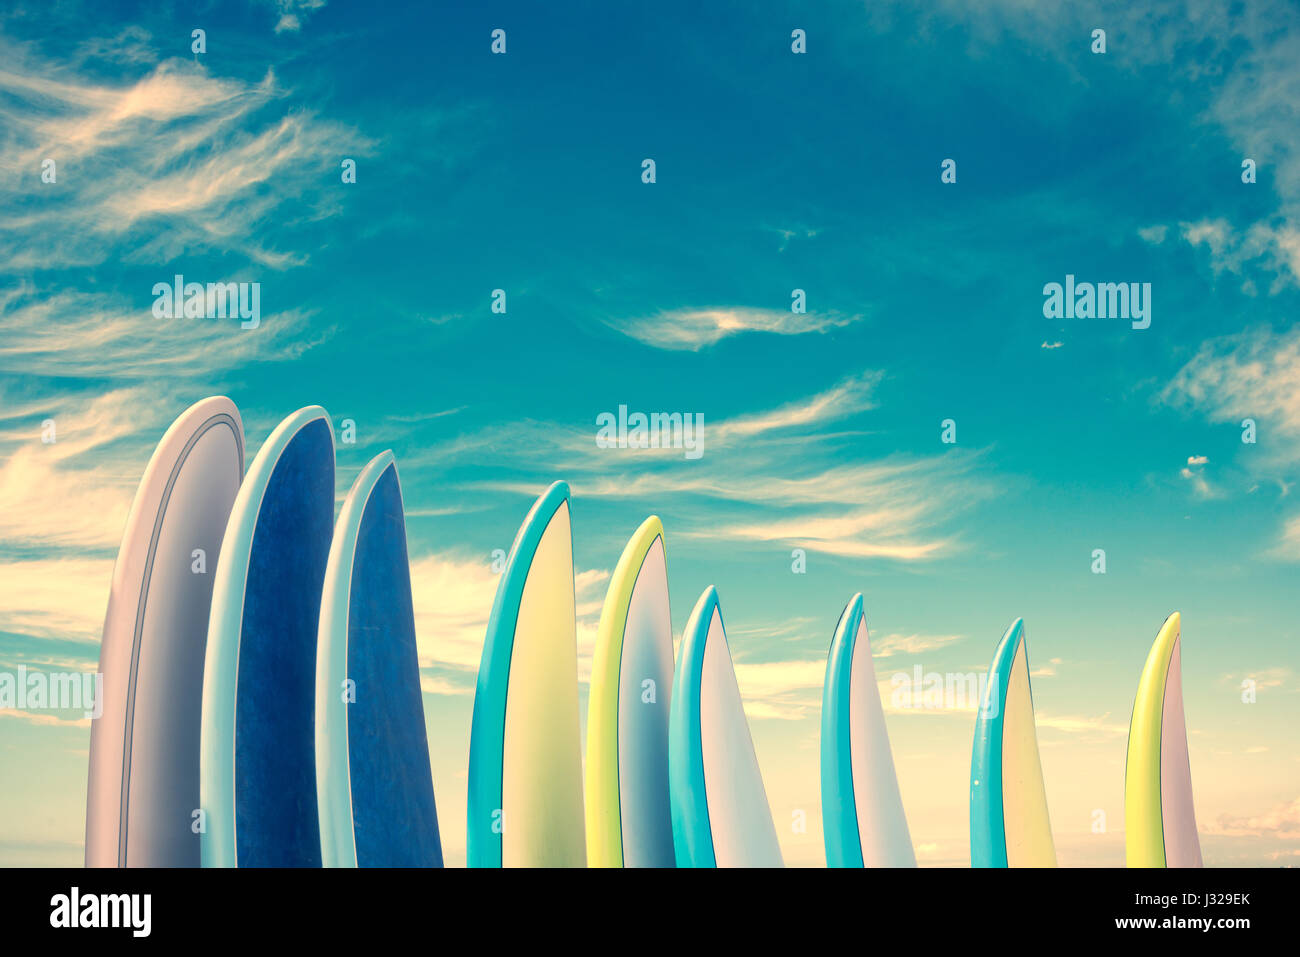 Stack of colorful surfboards on blue sky background with copy space, retro vintage filter Stock Photo